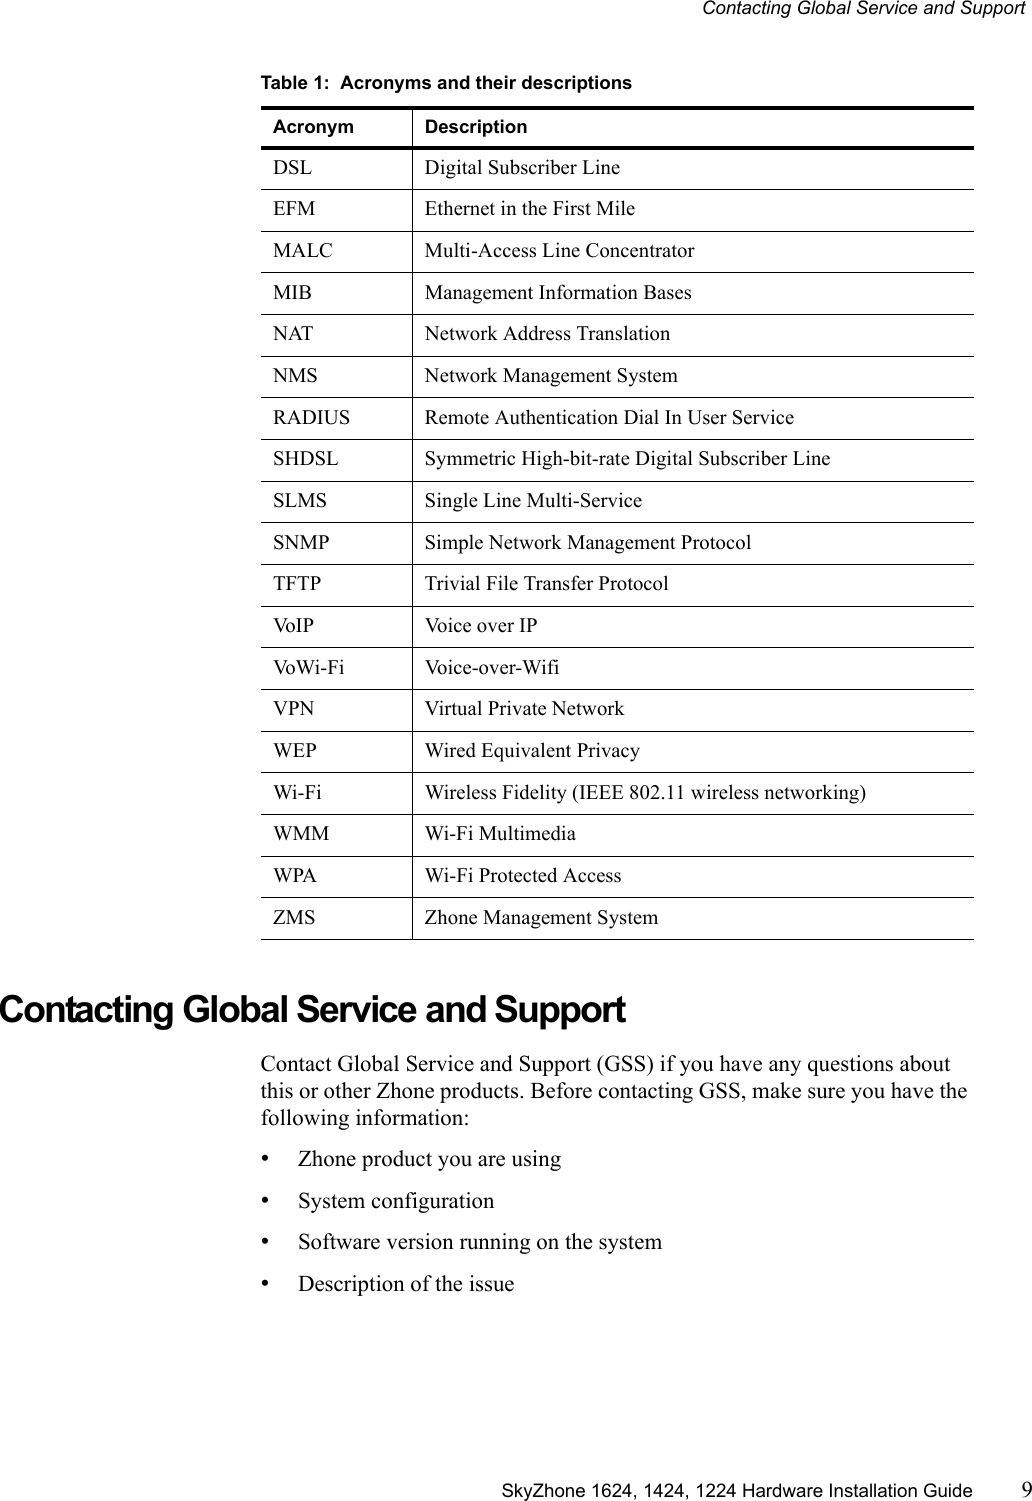 Contacting Global Service and Support SkyZhone 1624, 1424, 1224 Hardware Installation Guide 9Contacting Global Service and SupportContact Global Service and Support (GSS) if you have any questions about this or other Zhone products. Before contacting GSS, make sure you have the following information:•Zhone product you are using•System configuration•Software version running on the system•Description of the issueDSL Digital Subscriber LineEFM Ethernet in the First MileMALC Multi-Access Line ConcentratorMIB Management Information BasesNAT Network Address TranslationNMS Network Management SystemRADIUS Remote Authentication Dial In User ServiceSHDSL Symmetric High-bit-rate Digital Subscriber LineSLMS Single Line Multi-ServiceSNMP Simple Network Management ProtocolTFTP Trivial File Transfer ProtocolVoIP Voice over IP VoWi-Fi Voice-over-WifiVPN Virtual Private Network WEP Wired Equivalent PrivacyWi-Fi Wireless Fidelity (IEEE 802.11 wireless networking)WMM Wi-Fi MultimediaWPA Wi-Fi Protected AccessZMS Zhone Management SystemTable 1:  Acronyms and their descriptionsAcronym Description